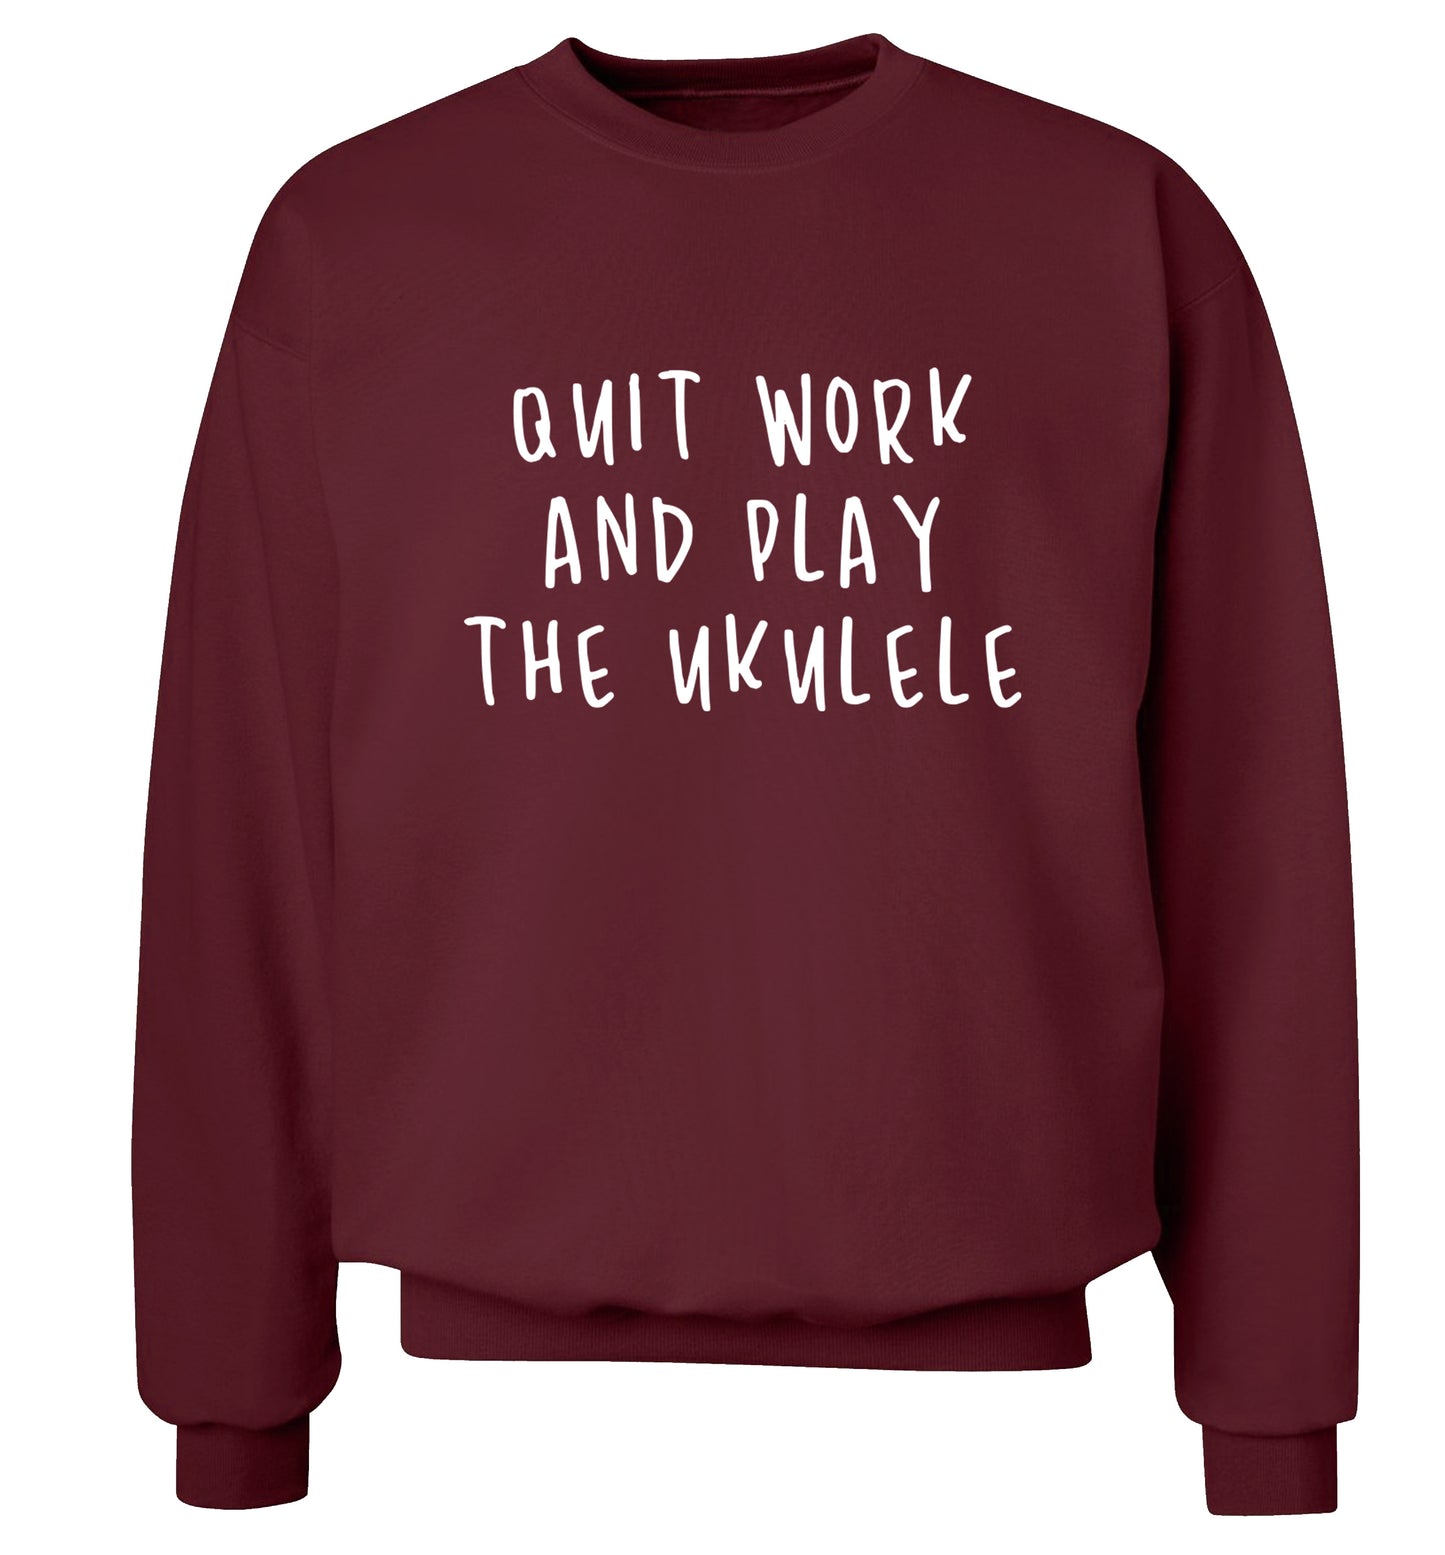 Quit work and play the ukulele Adult's unisex maroon Sweater 2XL